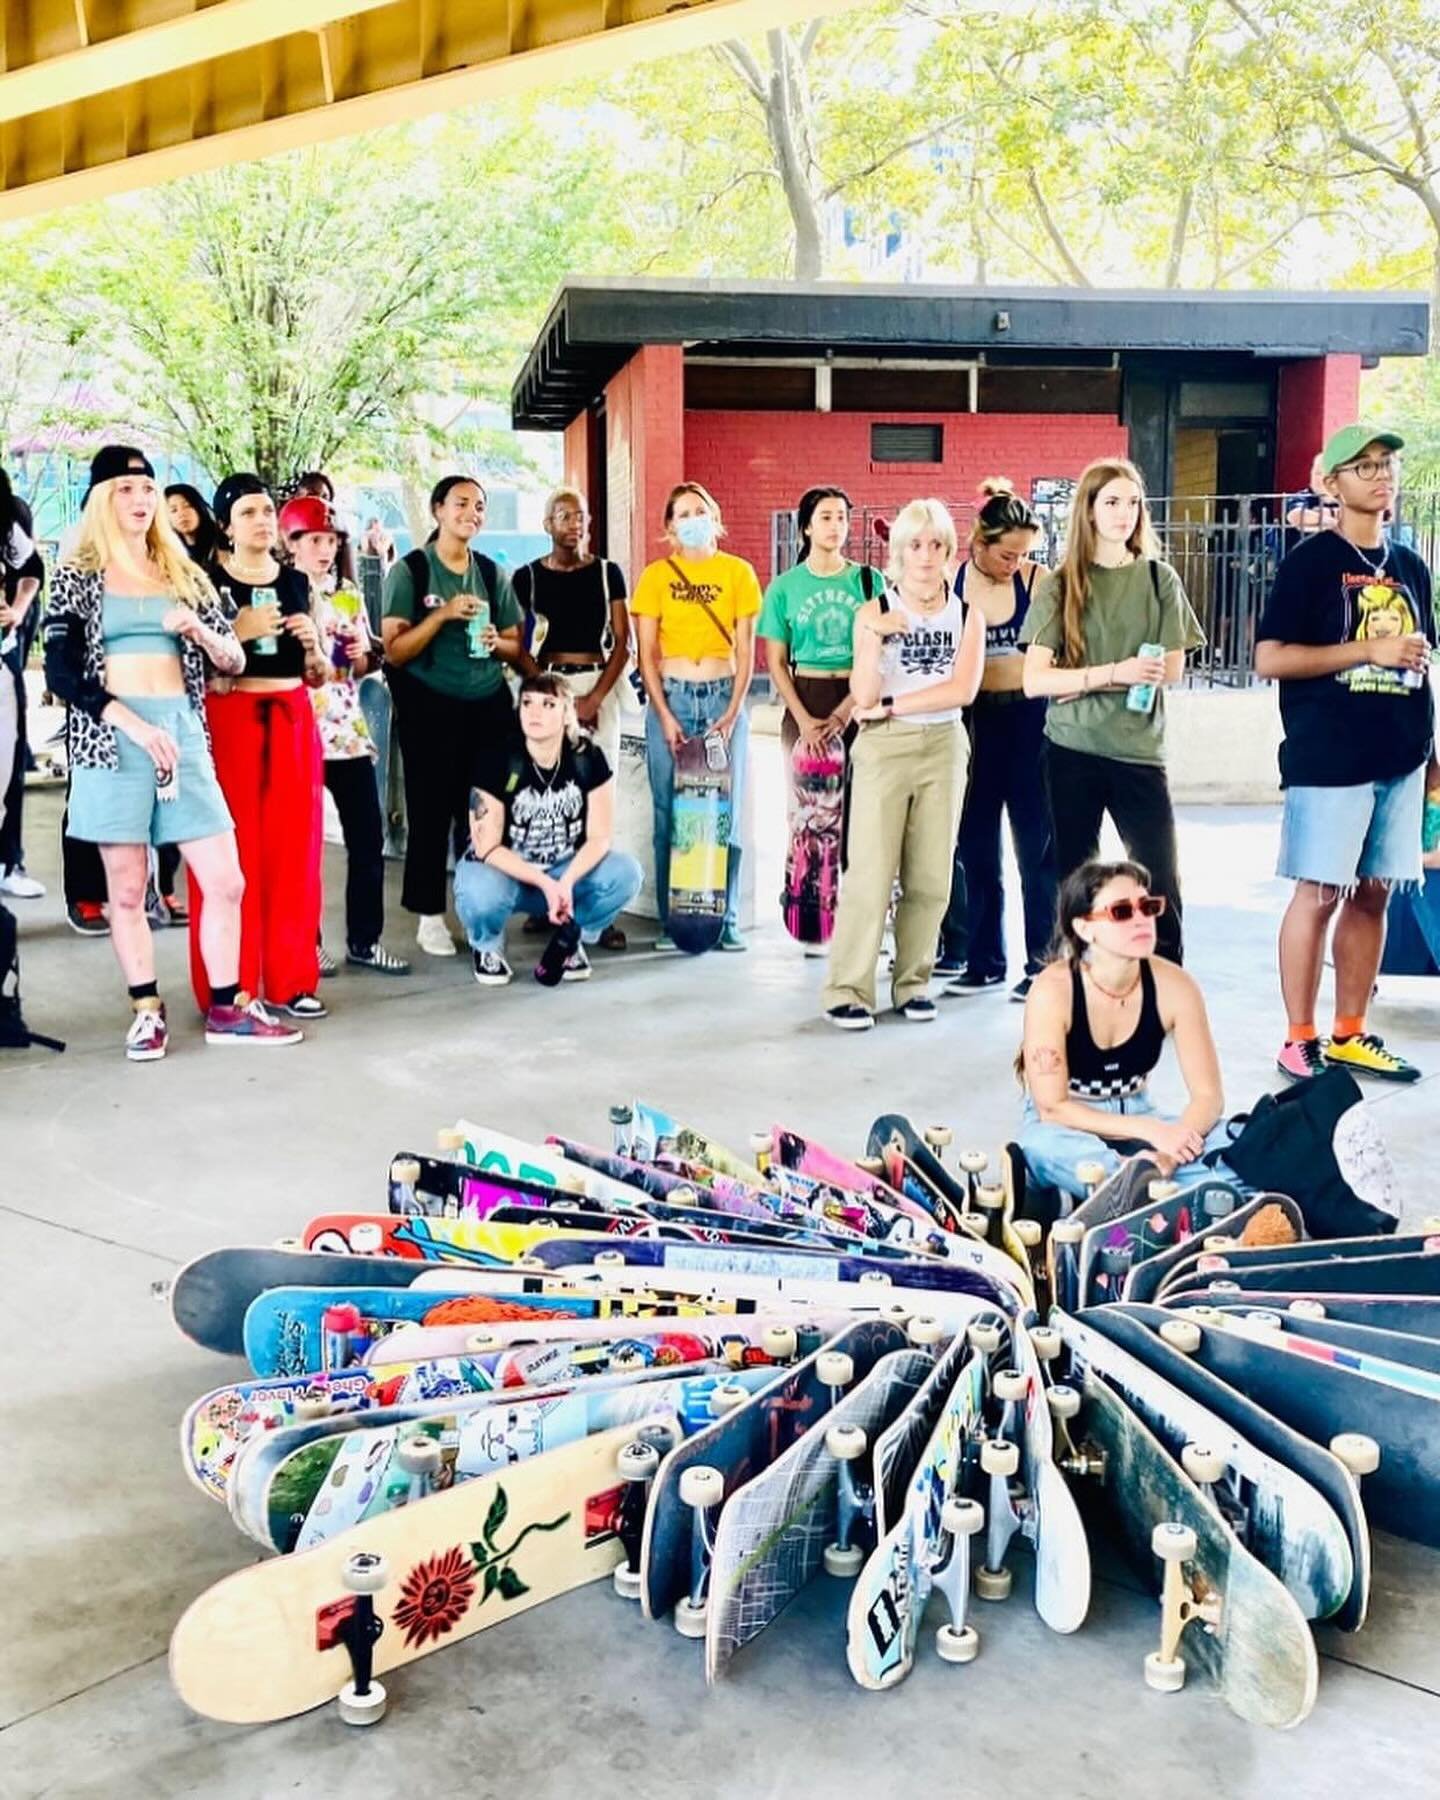 NYC Skaters, Join us this Weds May 1st on Zoom at 6PM 

Share your ideas in what you would like to see in shaping &amp; designing the Brooklyn Skate Garden. 

Please join the meeting to offer input on the design to make the Brooklyn Skate Garden the 